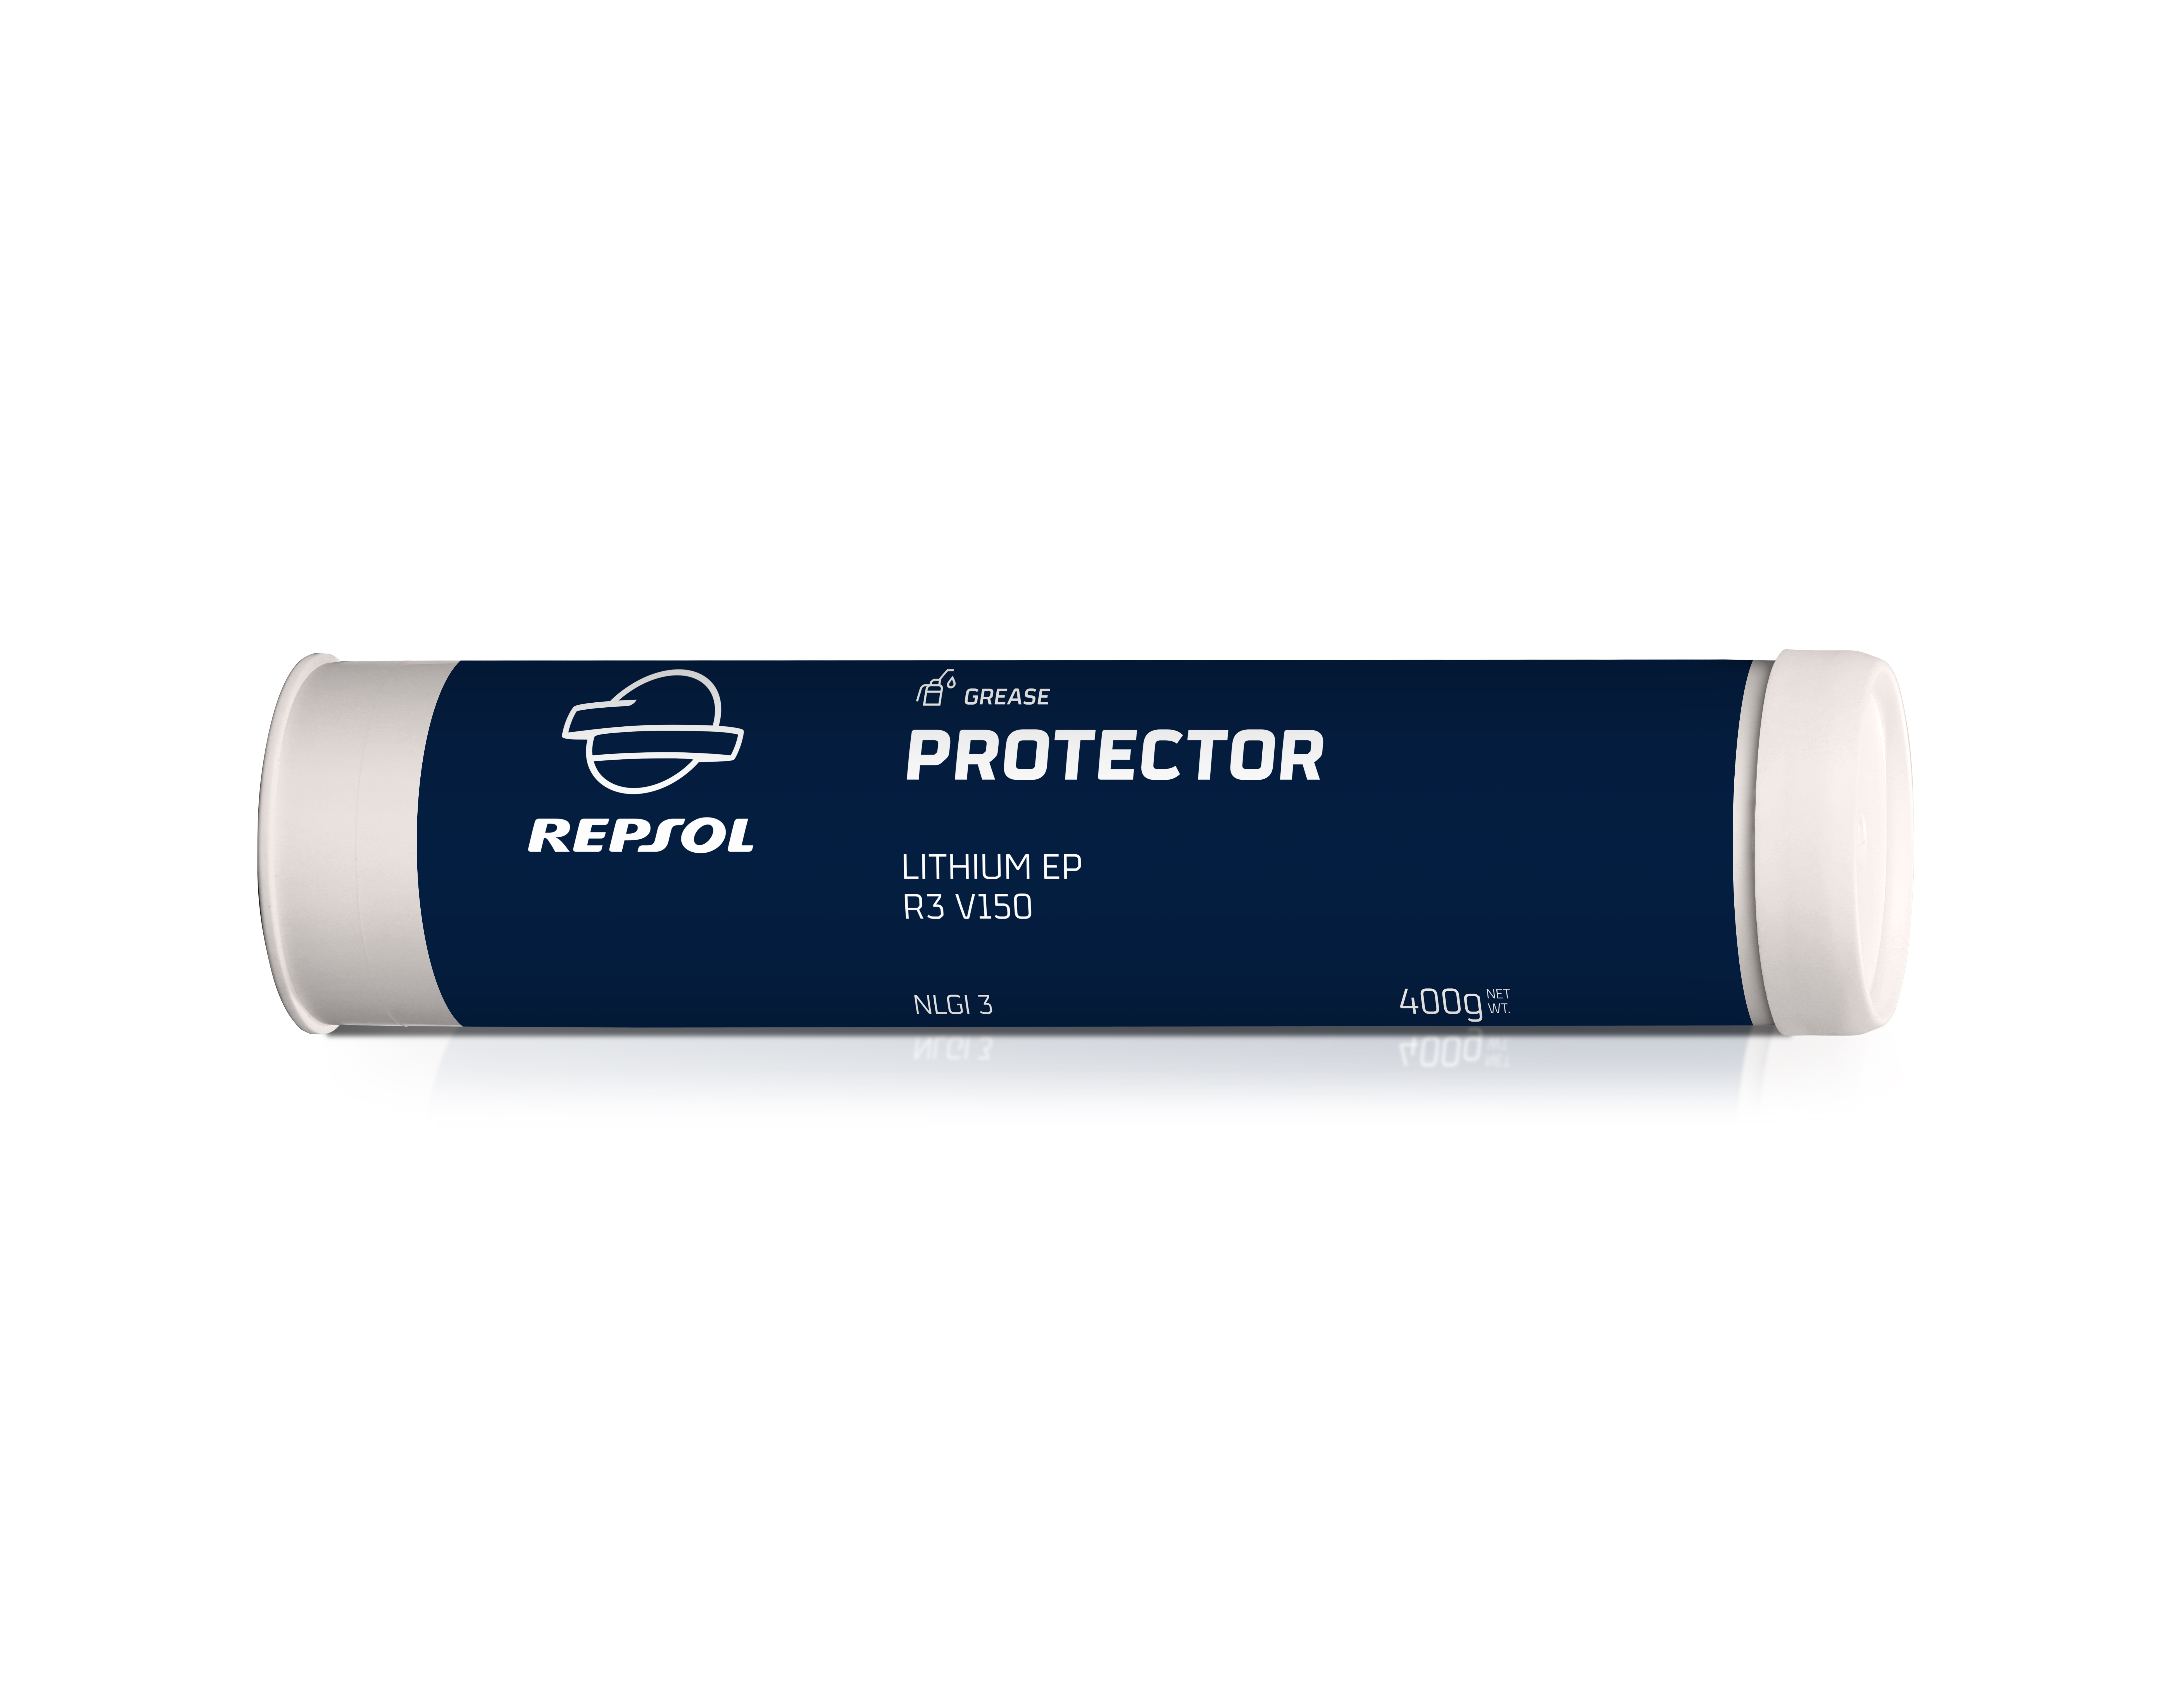 Gama Protector PROTECTOR LITHIUM EP R3 V150